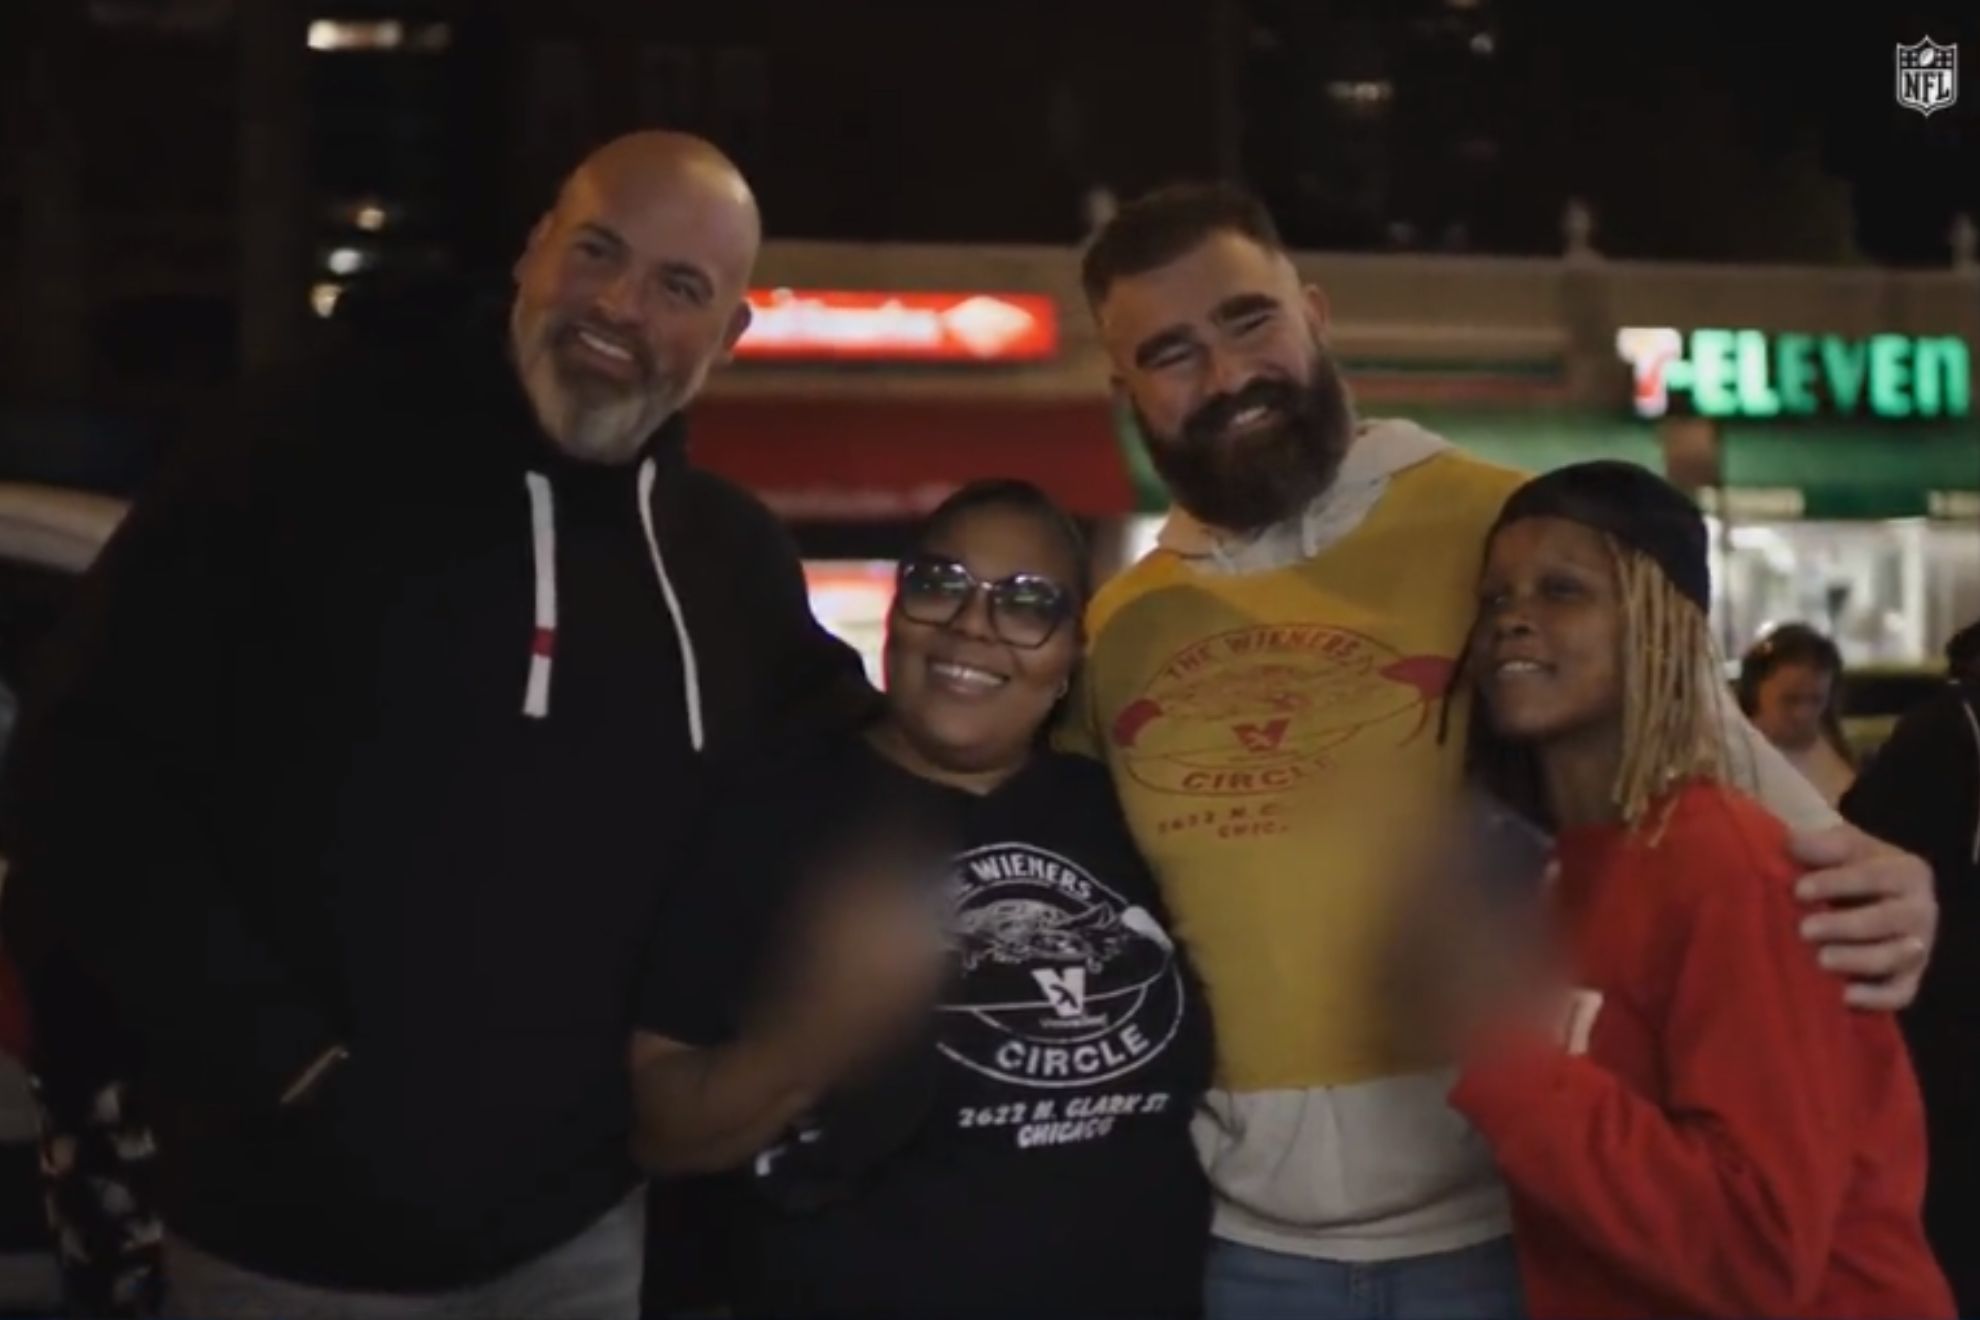 Jason Kelce trolls Wieners Circle staff member, who claps back with hilarious insult